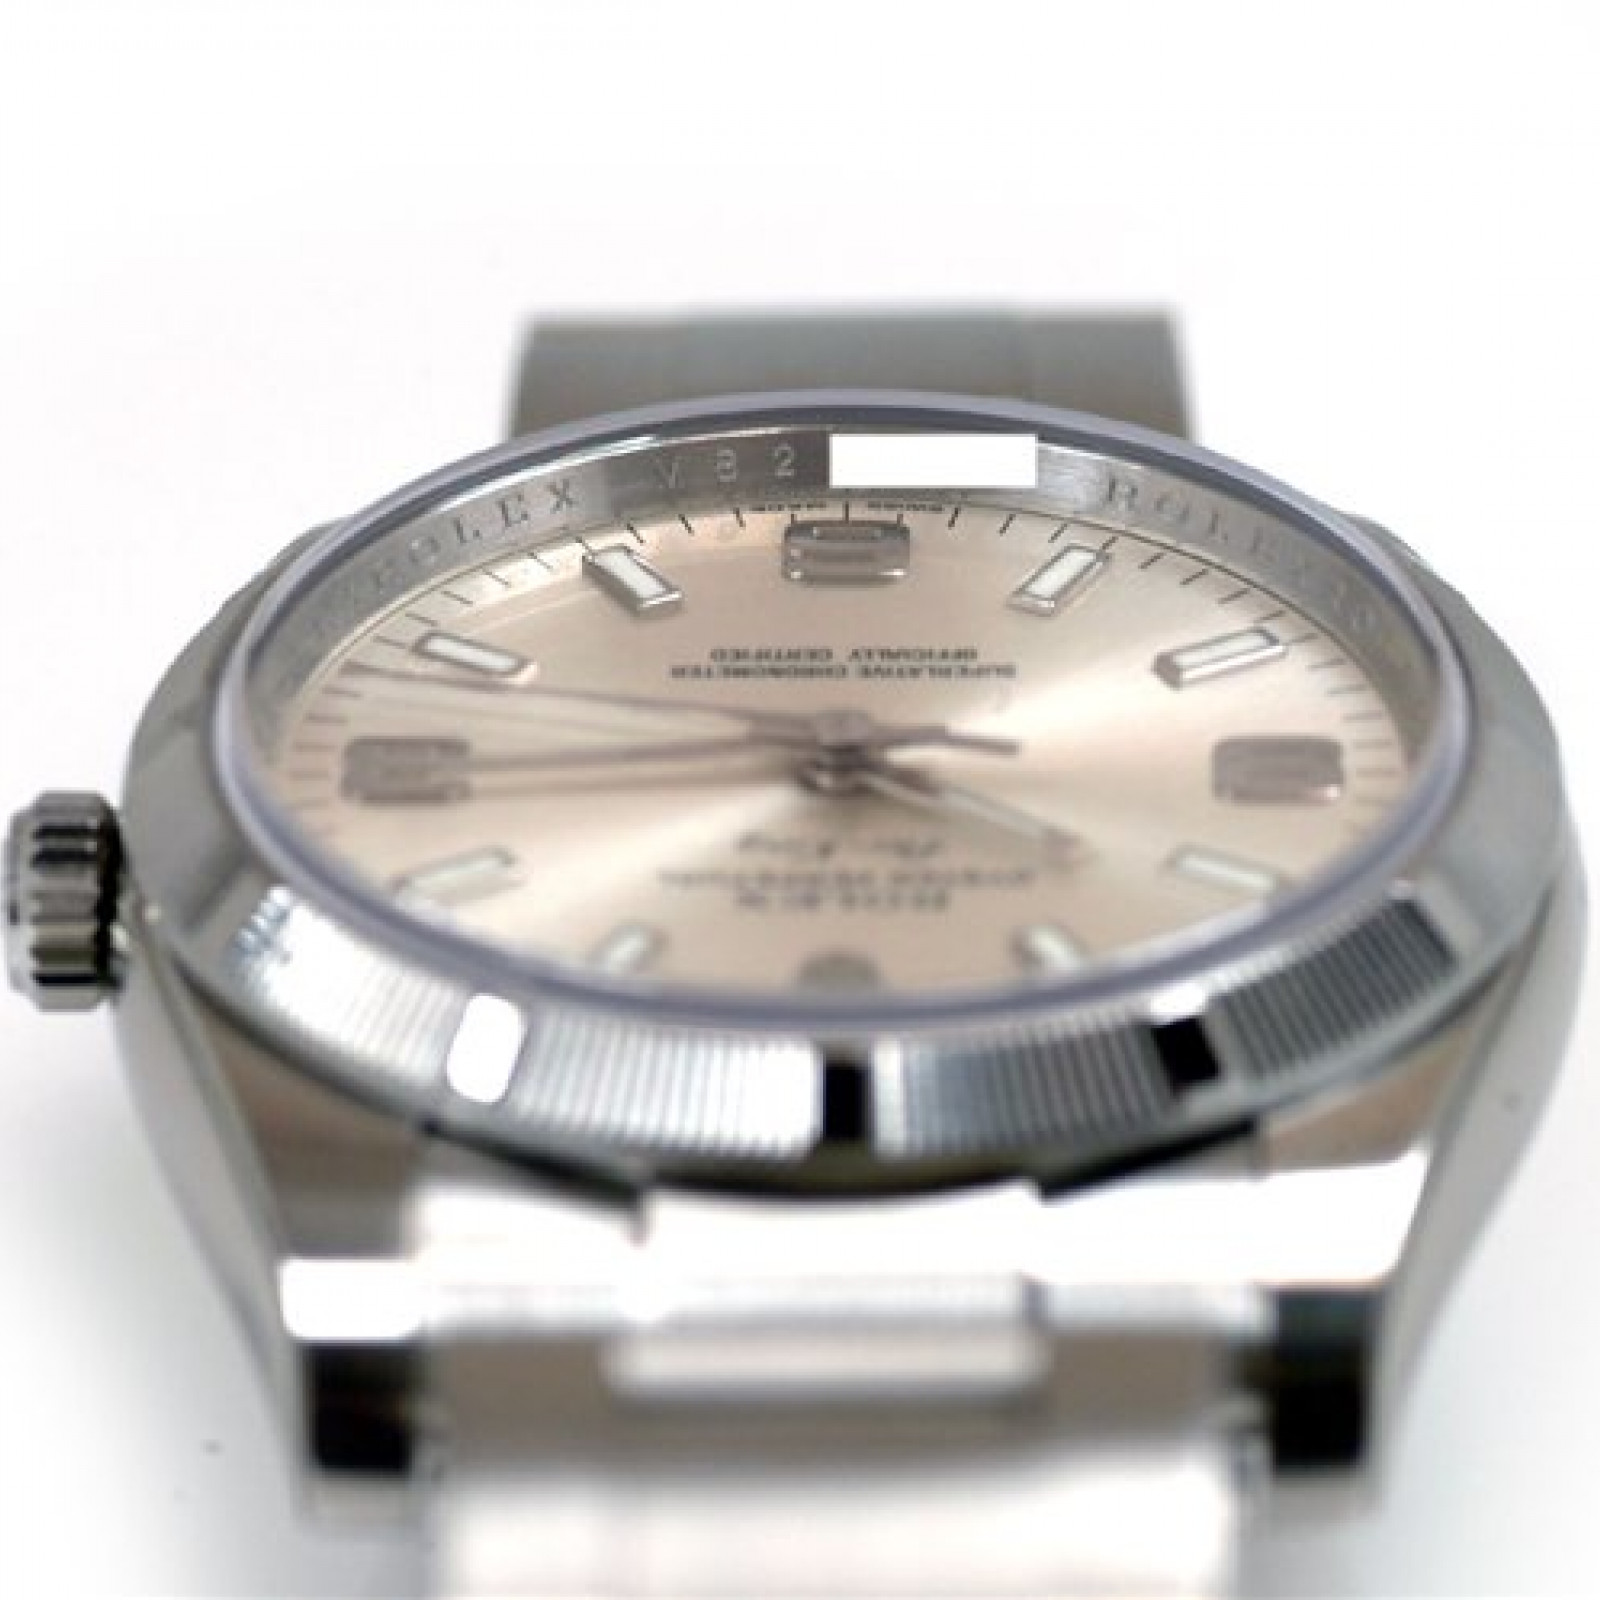 Rolex Oyster Perpetual Air King 114210 Steel